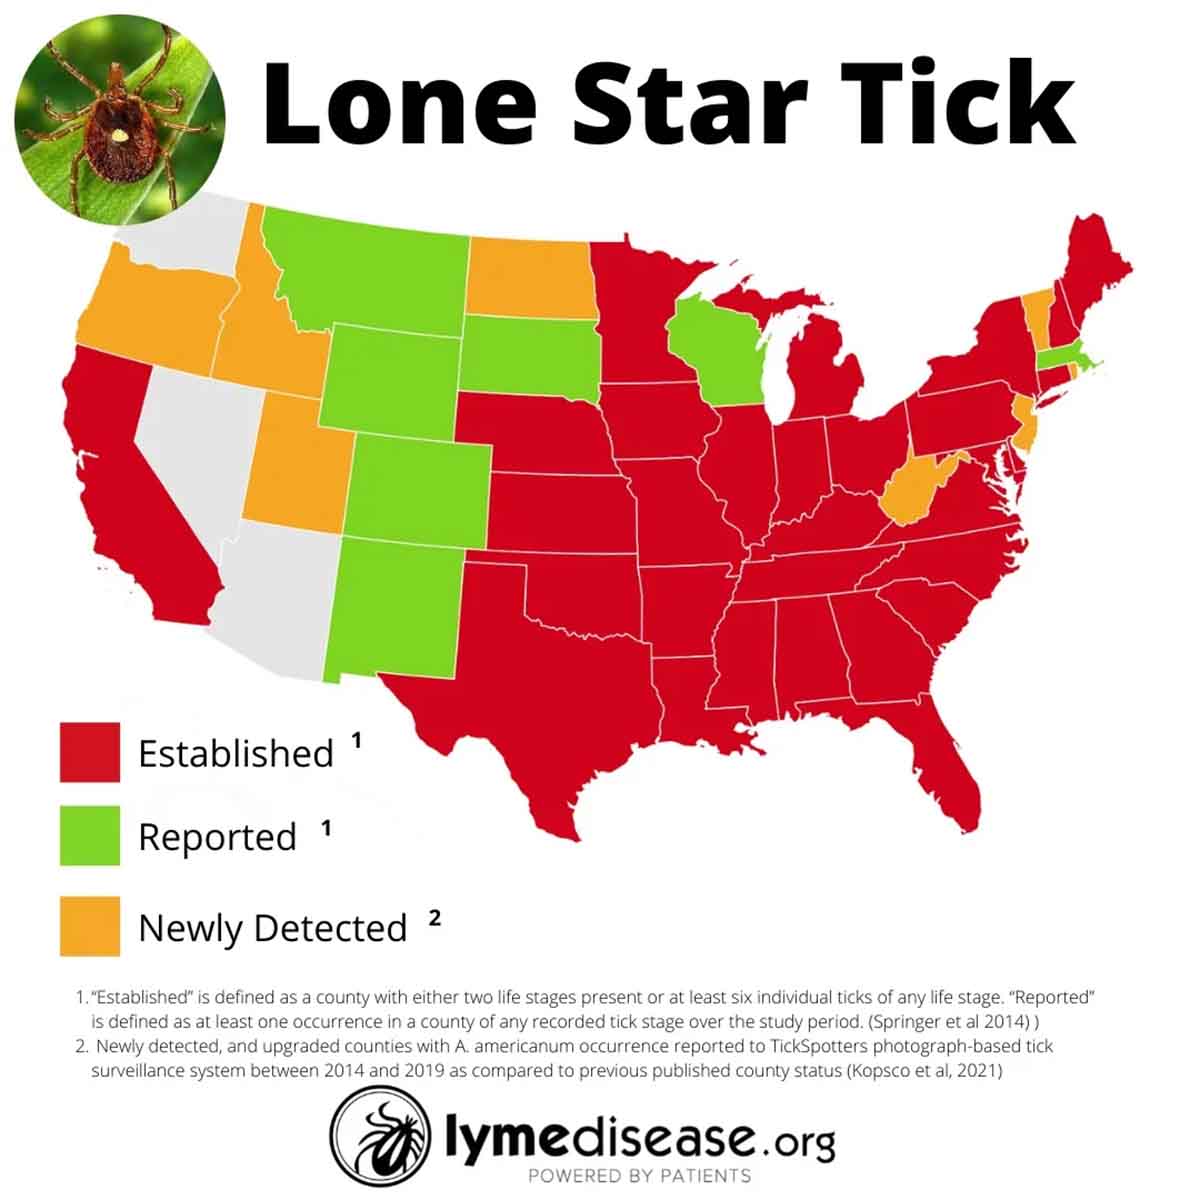 Lone Star Tick That Causes Red Meat Allergy Spotted Nearly Everywhere